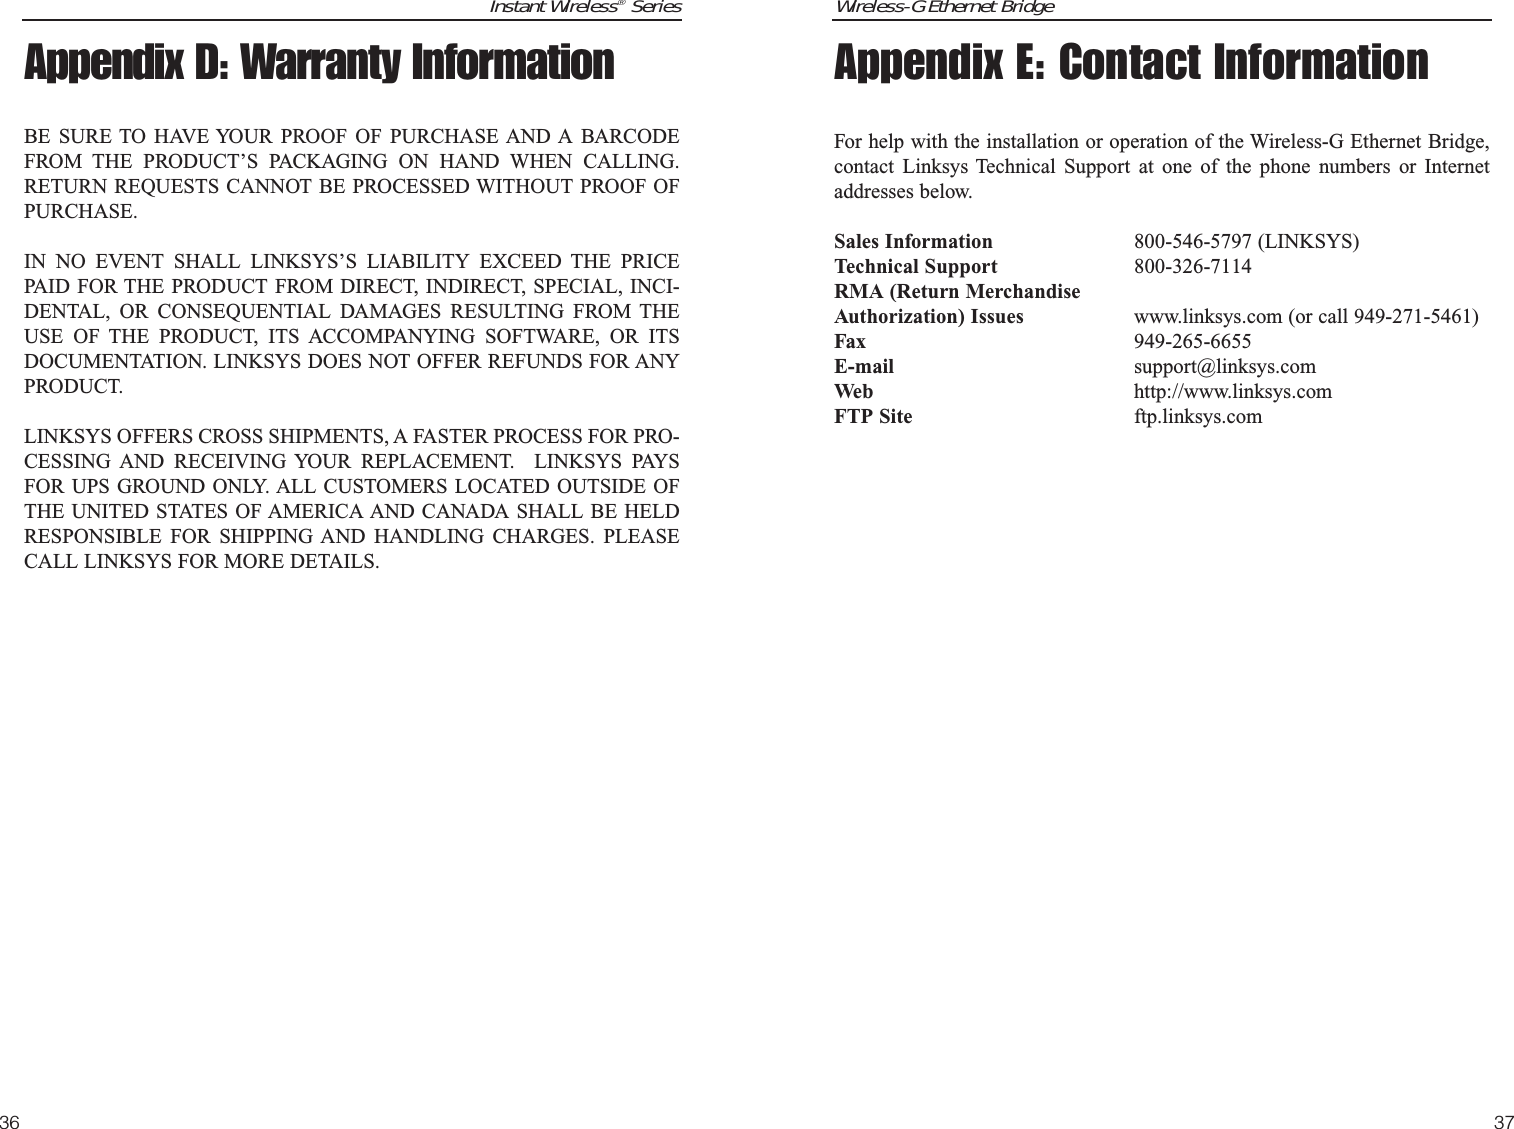 Wireless-G Ethernet BridgeAppendix E: Contact InformationFor help with the installation or operation of the Wireless-G Ethernet Bridge,contact Linksys Technical Support at one of the phone numbers or Internetaddresses below.Sales Information 800-546-5797 (LINKSYS)Technical Support 800-326-7114RMA (Return MerchandiseAuthorization) Issues www.linksys.com (or call 949-271-5461)Fax 949-265-6655E-mail support@linksys.comWeb http://www.linksys.comFTP Site ftp.linksys.com37Instant Wireless®Series36Appendix D: Warranty InformationBE SURE TO HAVE YOUR PROOF OF PURCHASE AND A BARCODEFROM THE PRODUCT’S PACKAGING ON HAND WHEN CALLING.RETURN REQUESTS CANNOT BE PROCESSED WITHOUT PROOF OFPURCHASE. IN NO EVENT SHALL LINKSYS’S LIABILITY EXCEED THE PRICEPAID FOR THE PRODUCT FROM DIRECT, INDIRECT, SPECIAL, INCI-DENTAL, OR CONSEQUENTIAL DAMAGES RESULTING FROM THEUSE OF THE PRODUCT, ITS ACCOMPANYING SOFTWARE, OR ITSDOCUMENTATION. LINKSYS DOES NOT OFFER REFUNDS FOR ANYPRODUCT. LINKSYS OFFERS CROSS SHIPMENTS, A FASTER PROCESS FOR PRO-CESSING AND RECEIVING YOUR REPLACEMENT.  LINKSYS PAYSFOR UPS GROUND ONLY. ALL CUSTOMERS LOCATED OUTSIDE OFTHE UNITED STATES OF AMERICA AND CANADA SHALL BE HELDRESPONSIBLE FOR SHIPPING AND HANDLING CHARGES. PLEASECALL LINKSYS FOR MORE DETAILS.